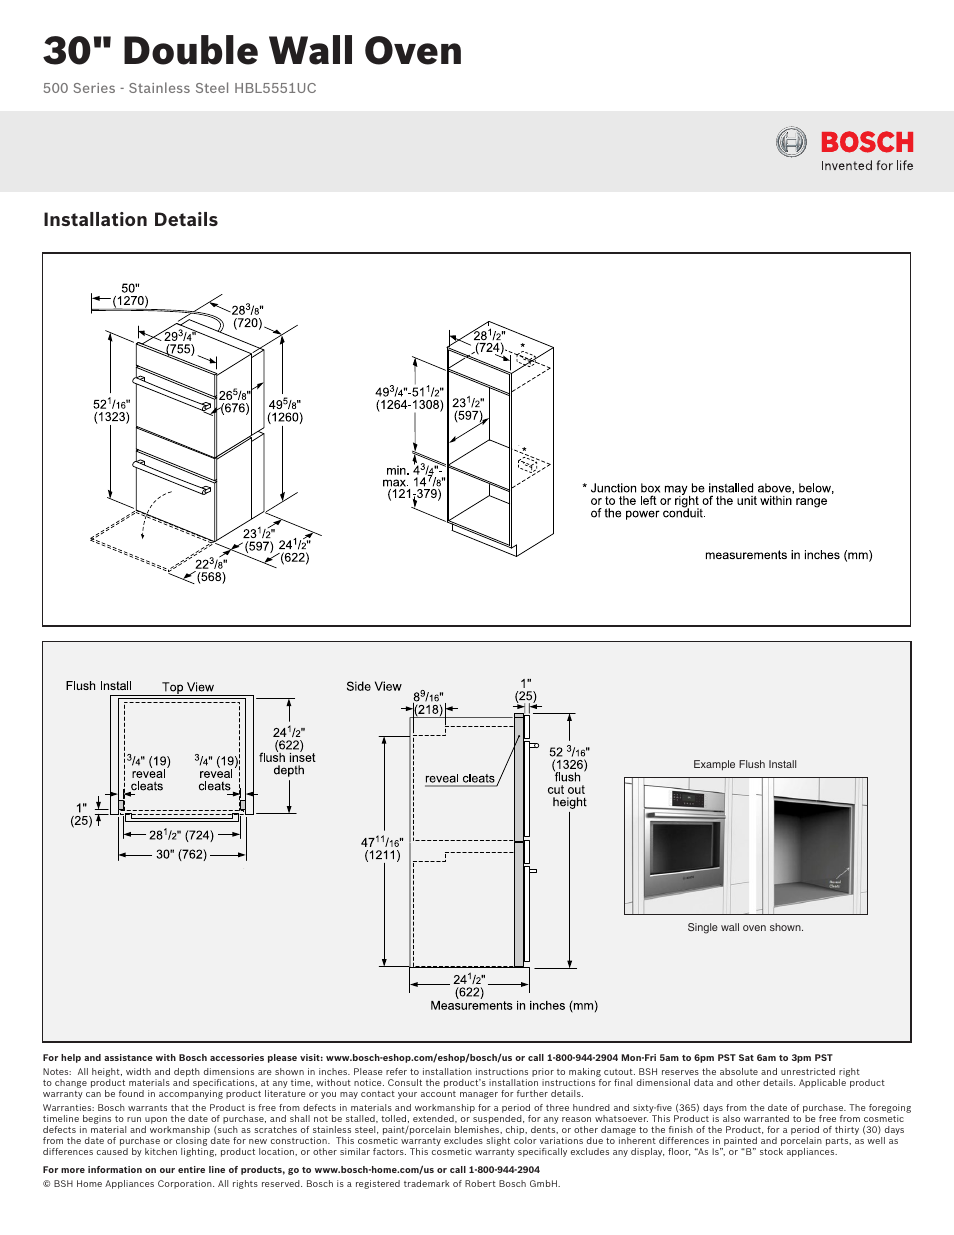 30" double wall oven, Installation details | Bosch HBL5551UC User Manual |  Page 2 / 3 | Original mode